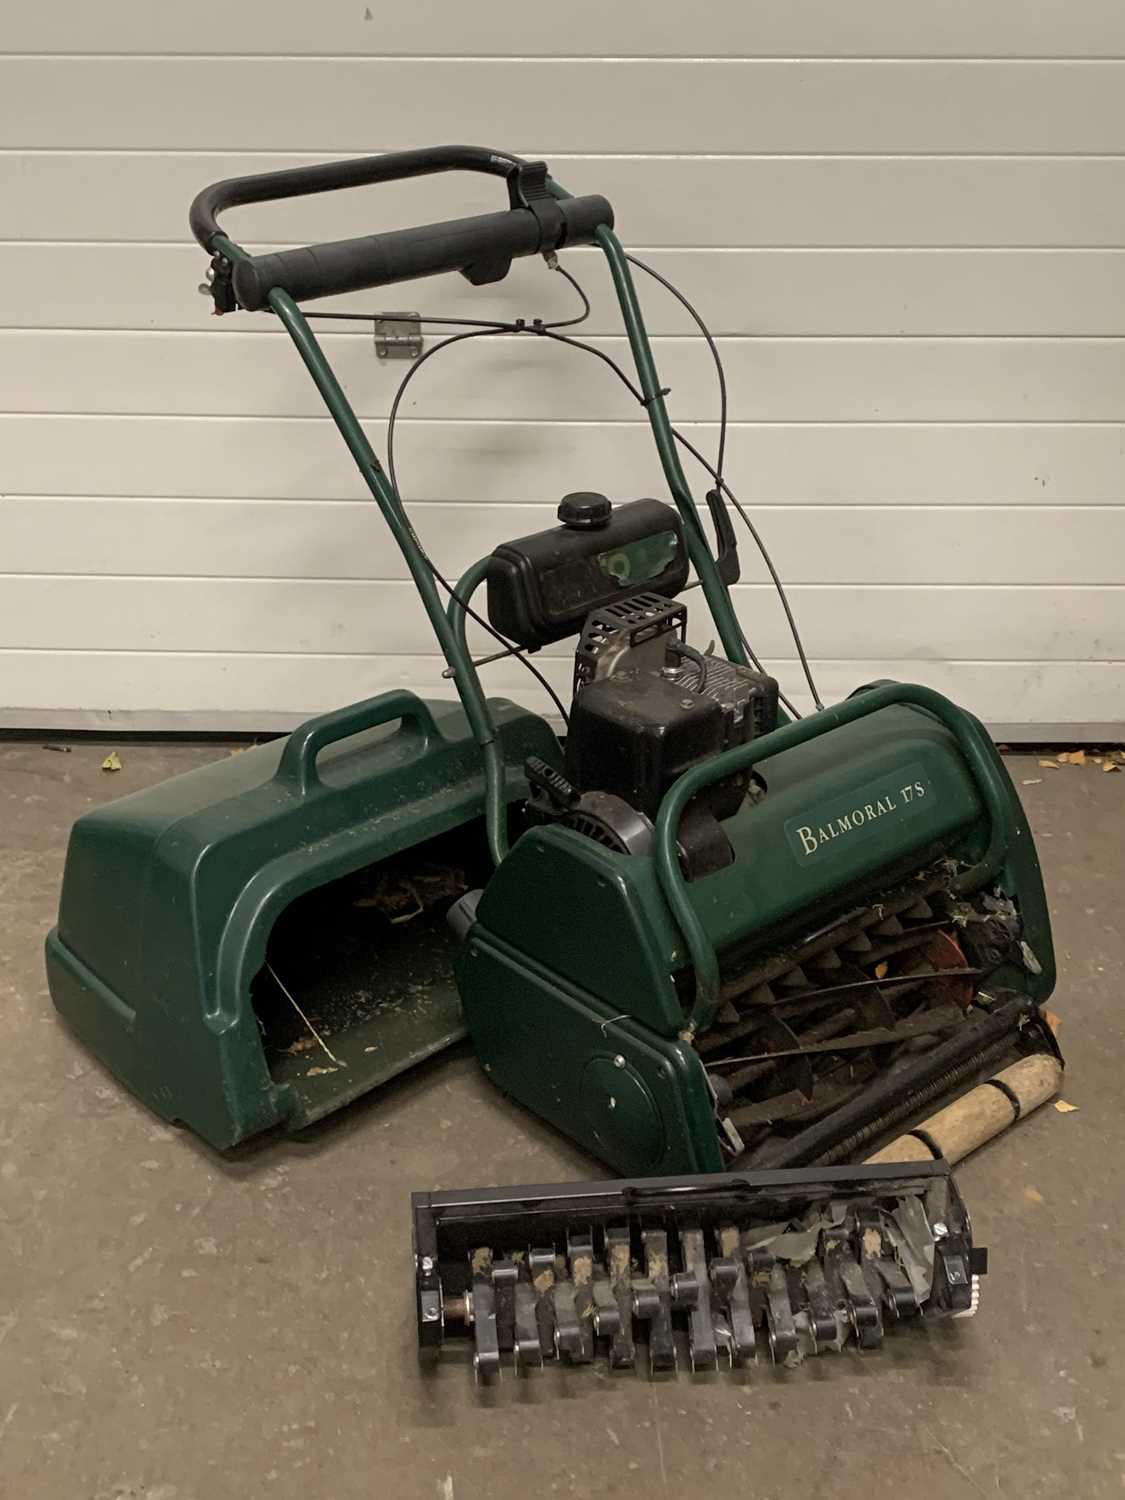 BALMORAL 17S PETROL LAWN MOWER with grass collection box by Atco, Hare & Tortoise self drive